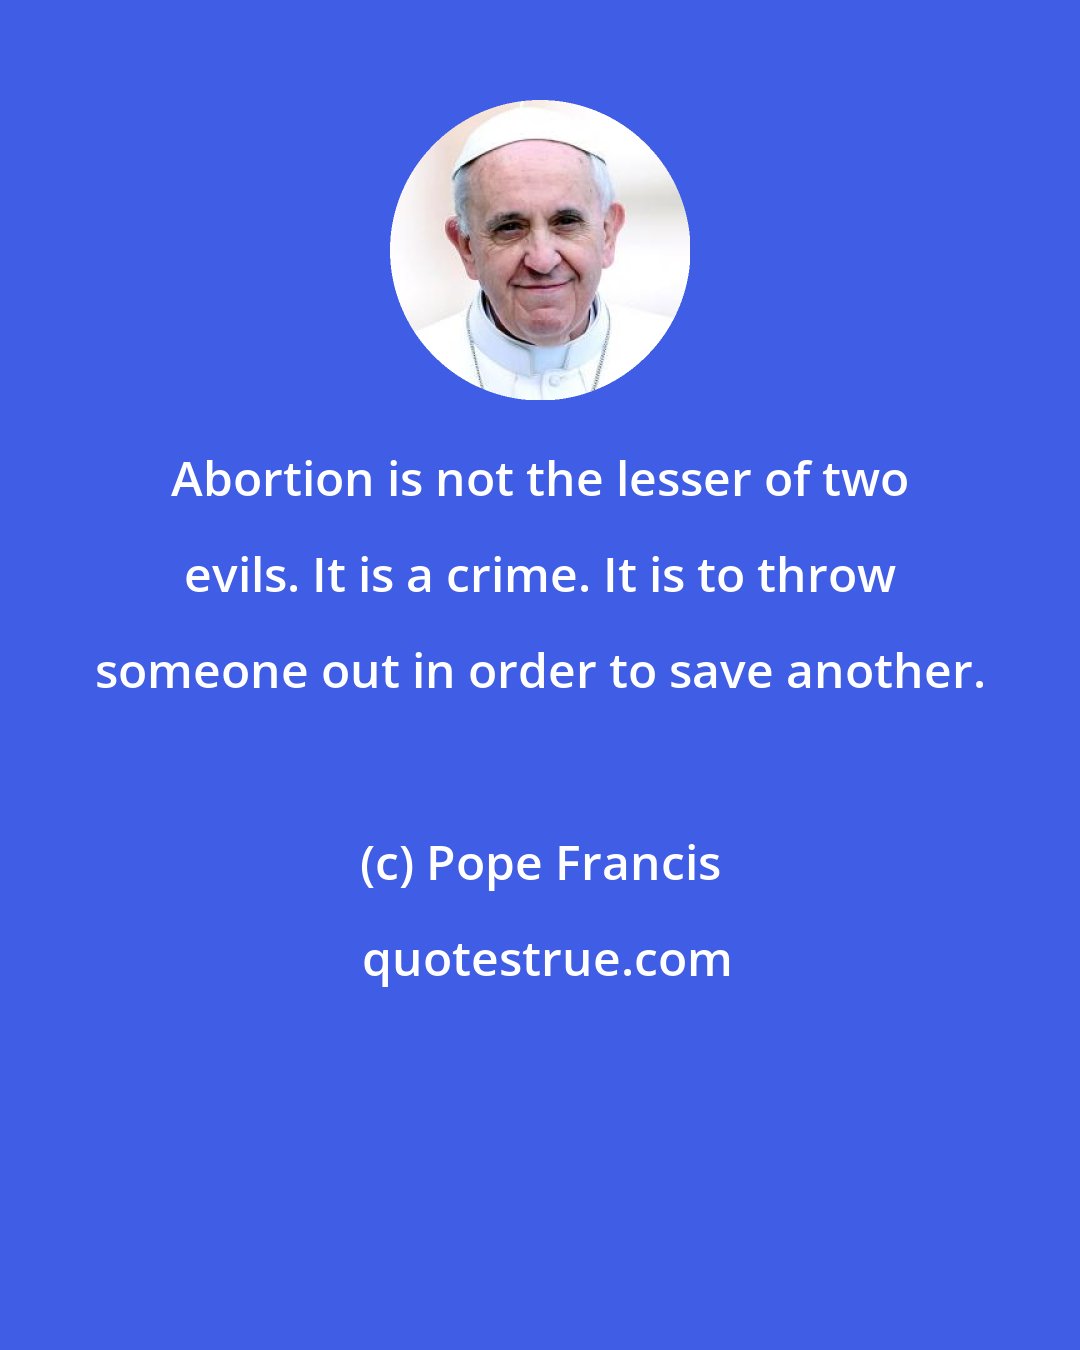 Pope Francis: Abortion is not the lesser of two evils. It is a crime. It is to throw someone out in order to save another.